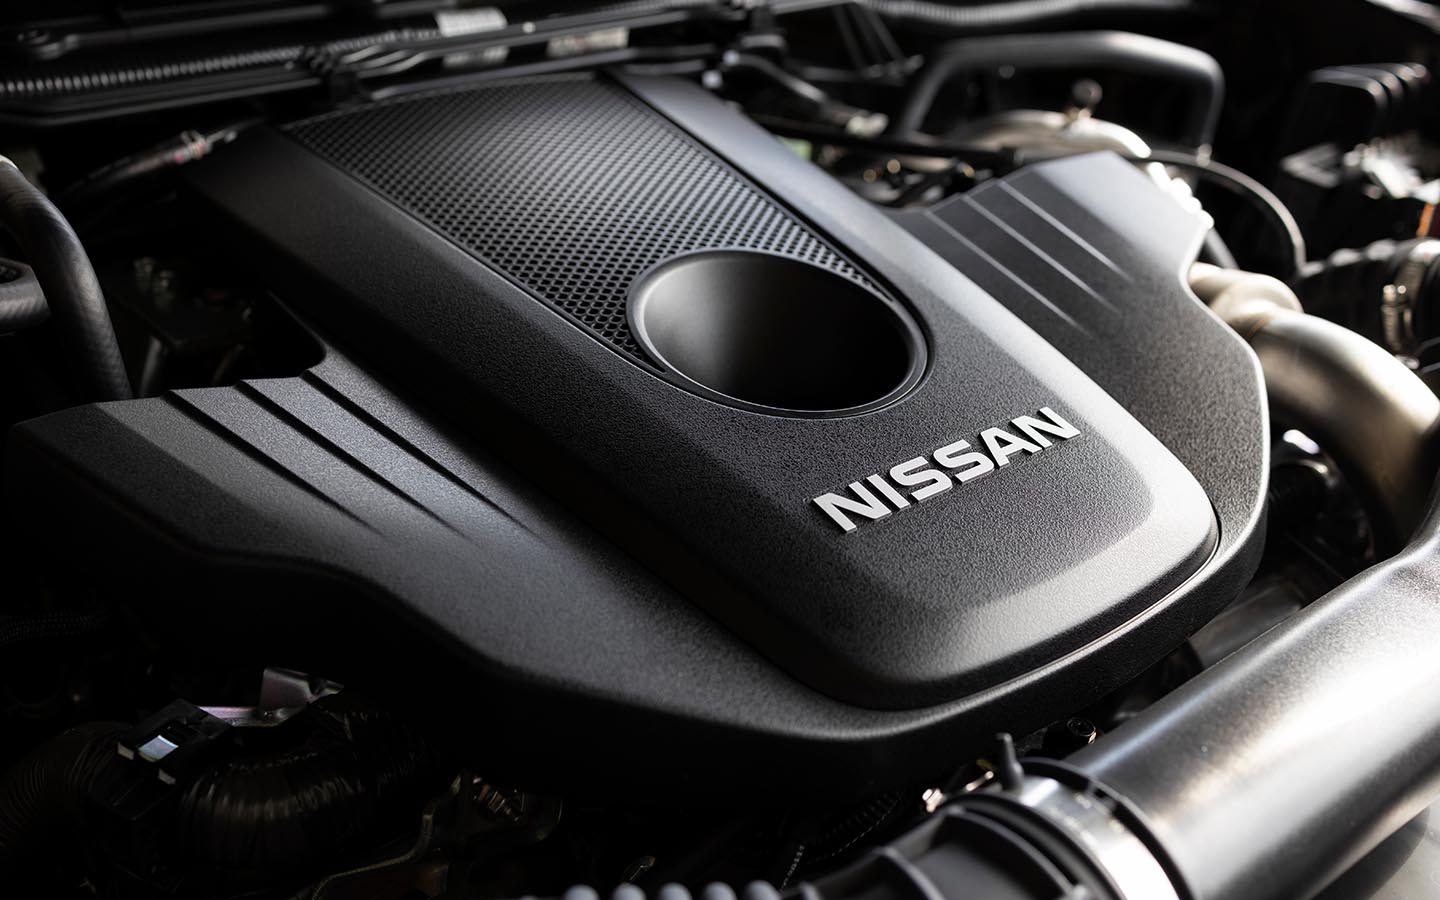 Nissan history and facts